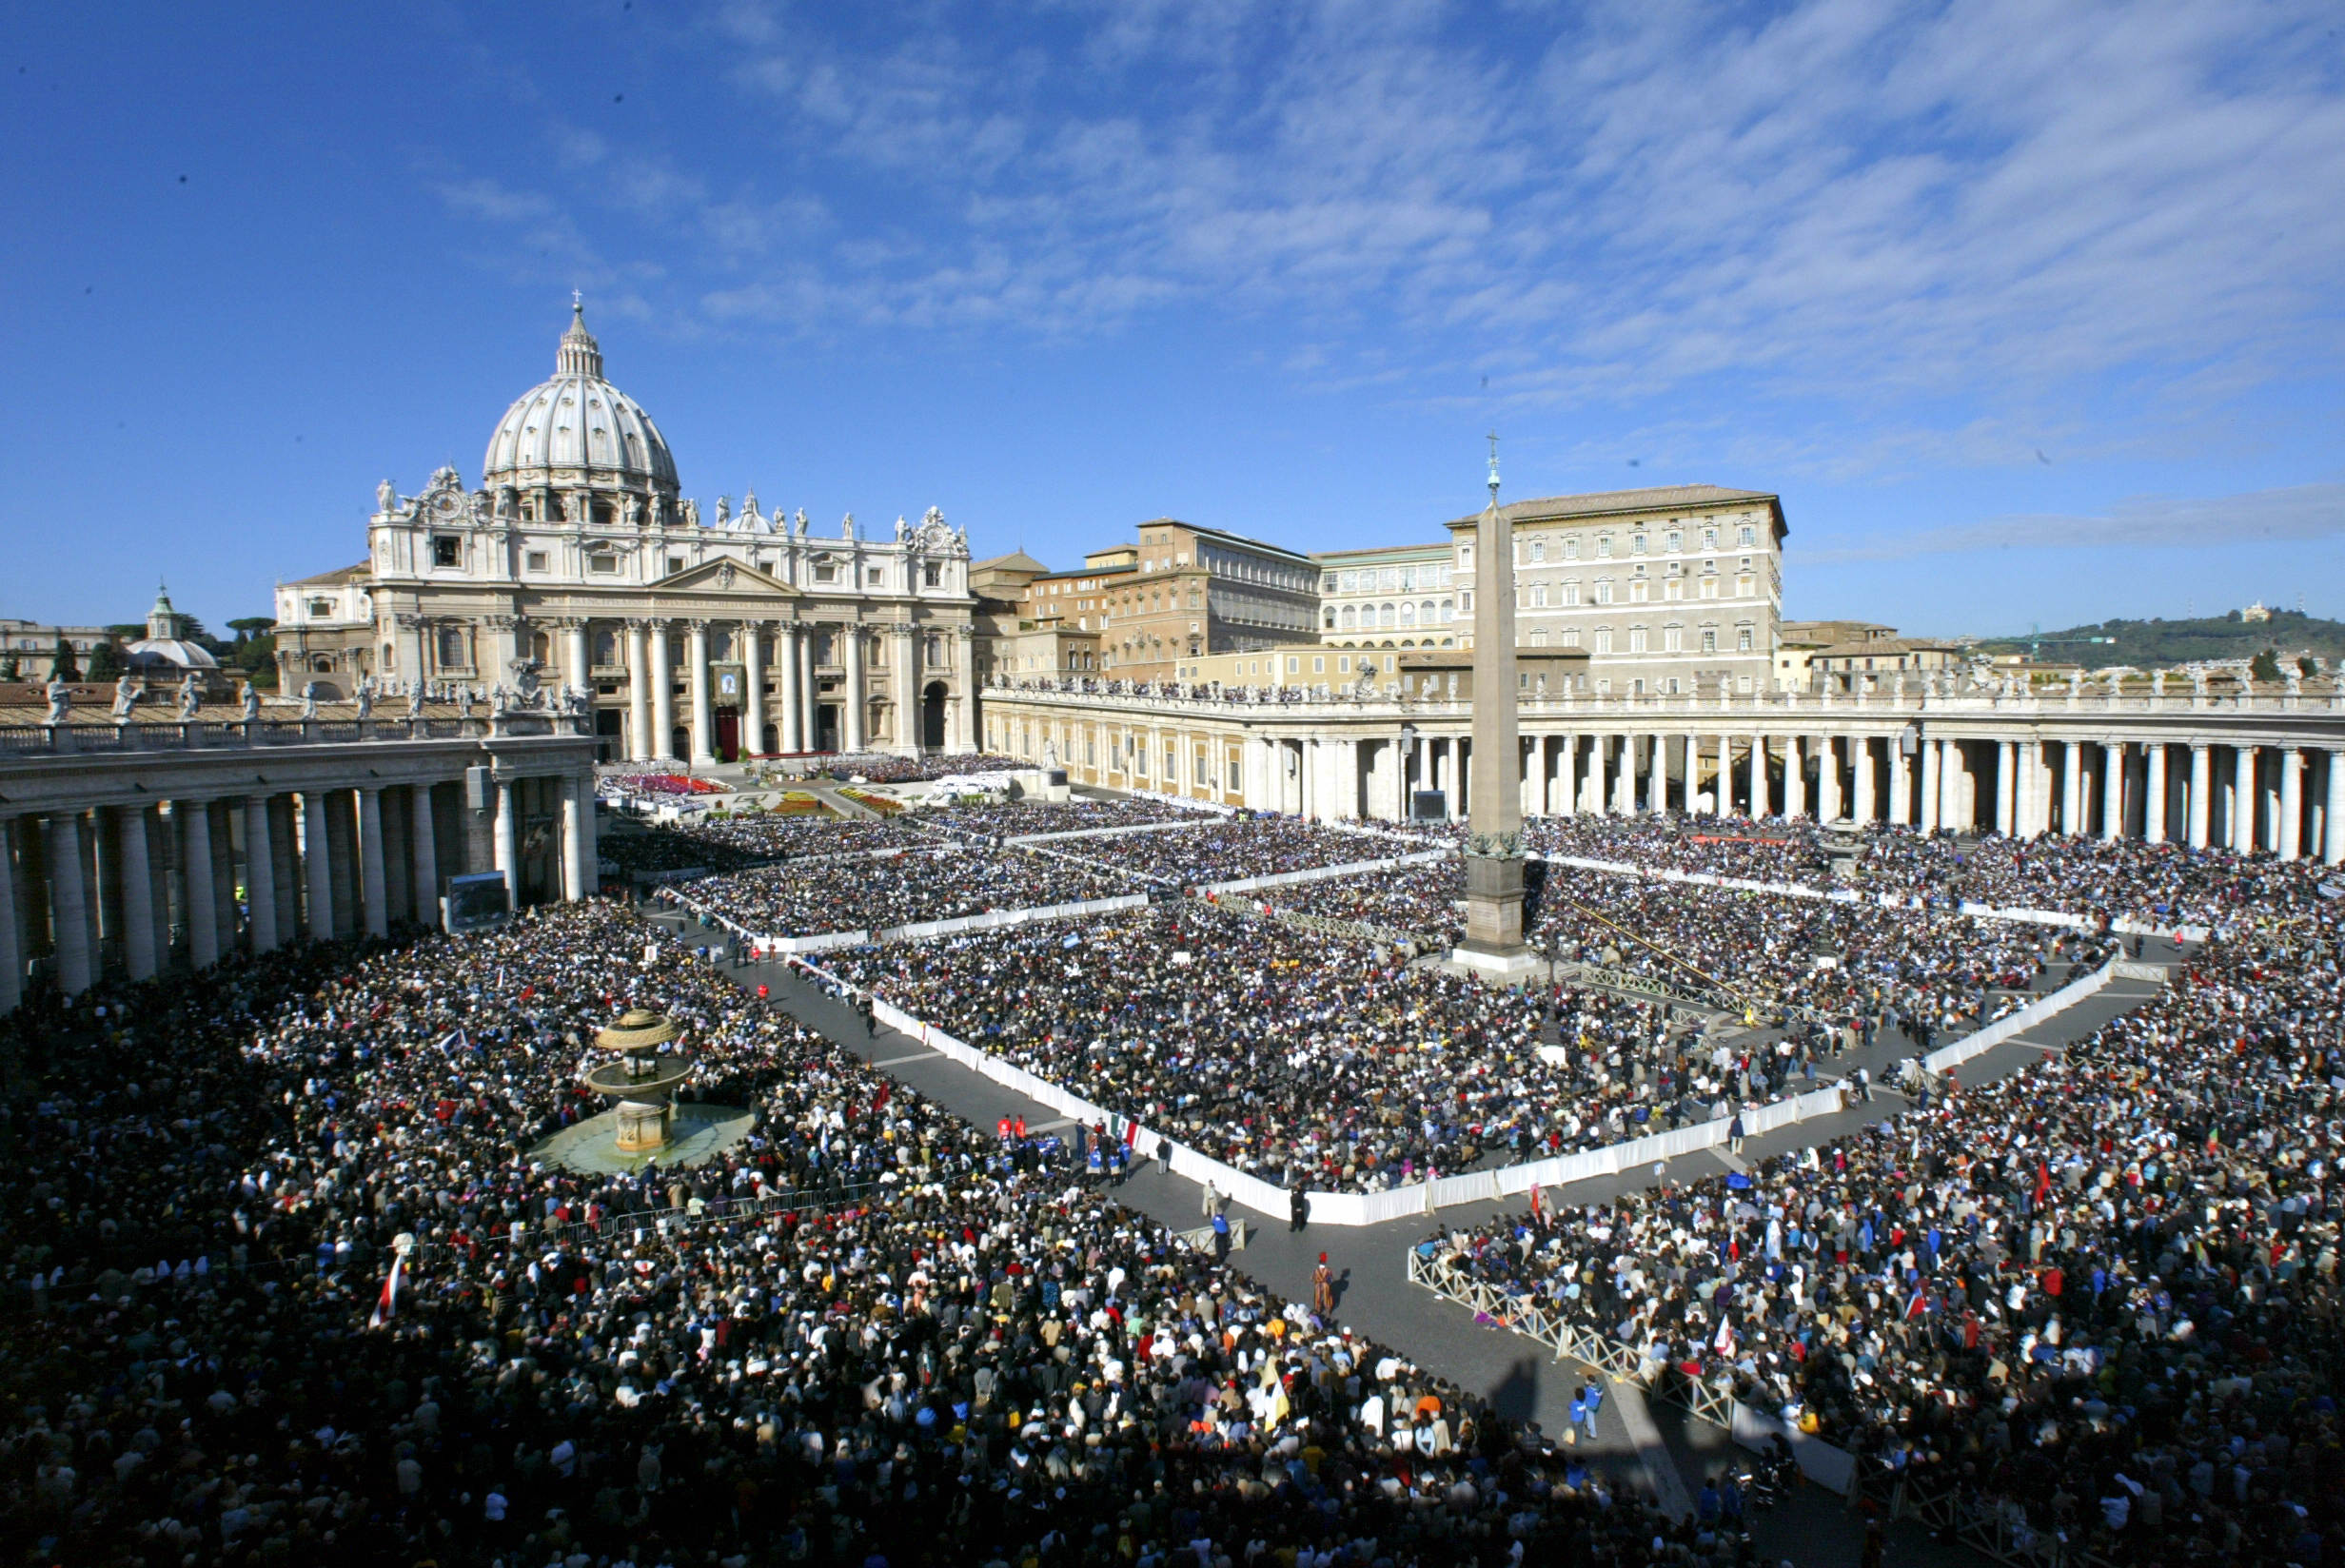 A giant crowd of pilgrms attend the mass celebrated by Pope John Paul II 19 October 2003 on St Peter Square at the Vatican for the beatification of Mother Theresa. Thousands of pilgrims flocked to the Vatican just six years after the death of the nun they called the "Saint of the gutters". AFP PHOTO PATRICK HERTZOG